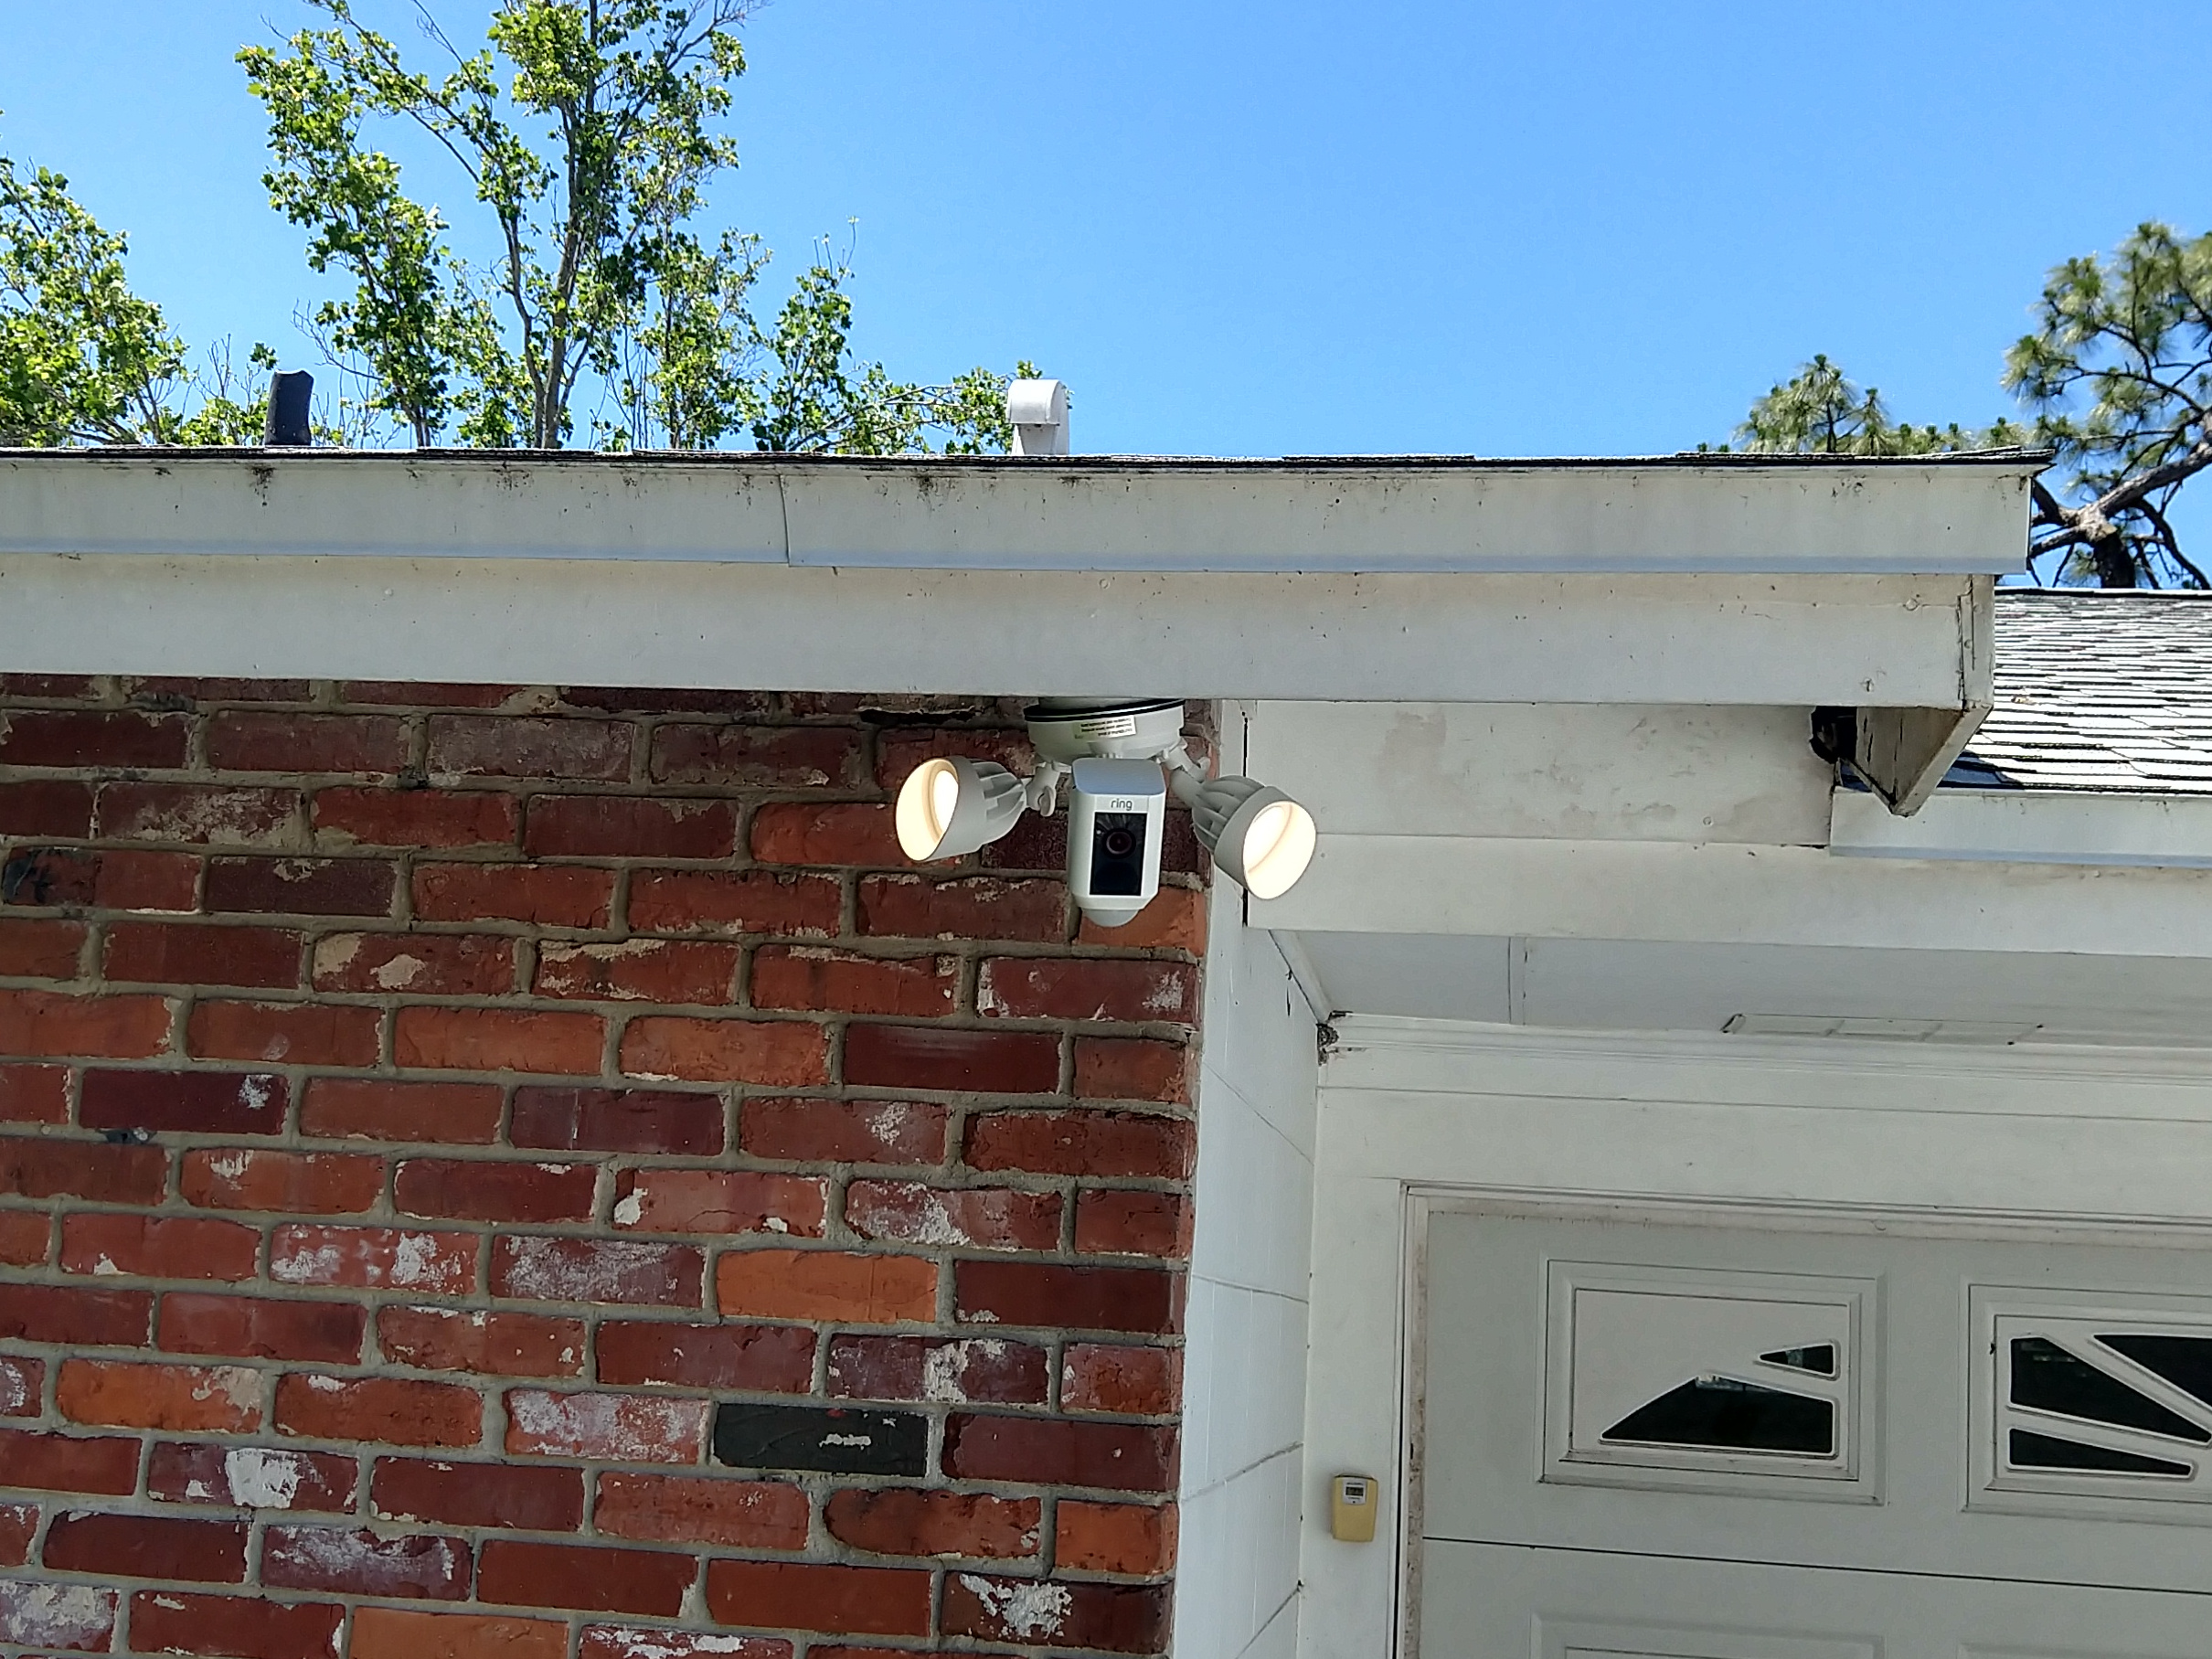 ring floodlight cam mounting under eave